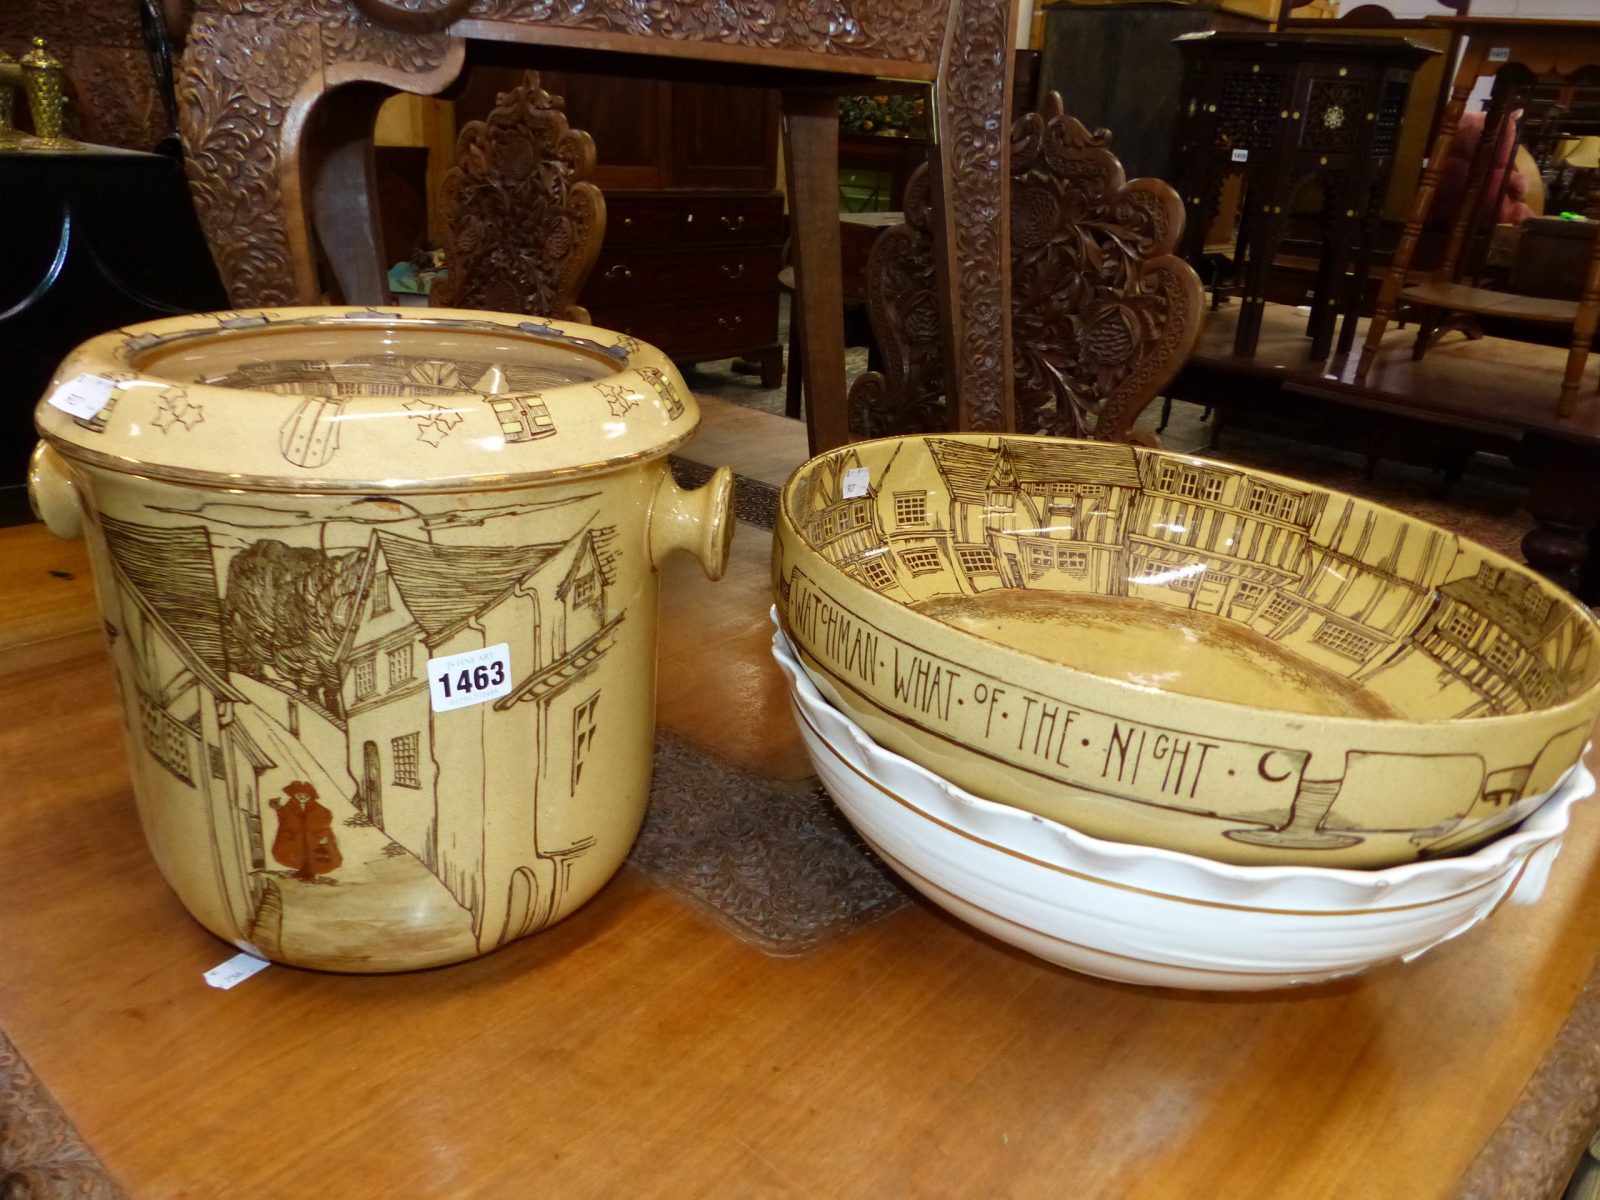 A RARE DOULTON SERIES WARE WATCHMAN WHAT OF THE NIGHT WASH BOWL AND SLOP PAIL AND ONE OTHER